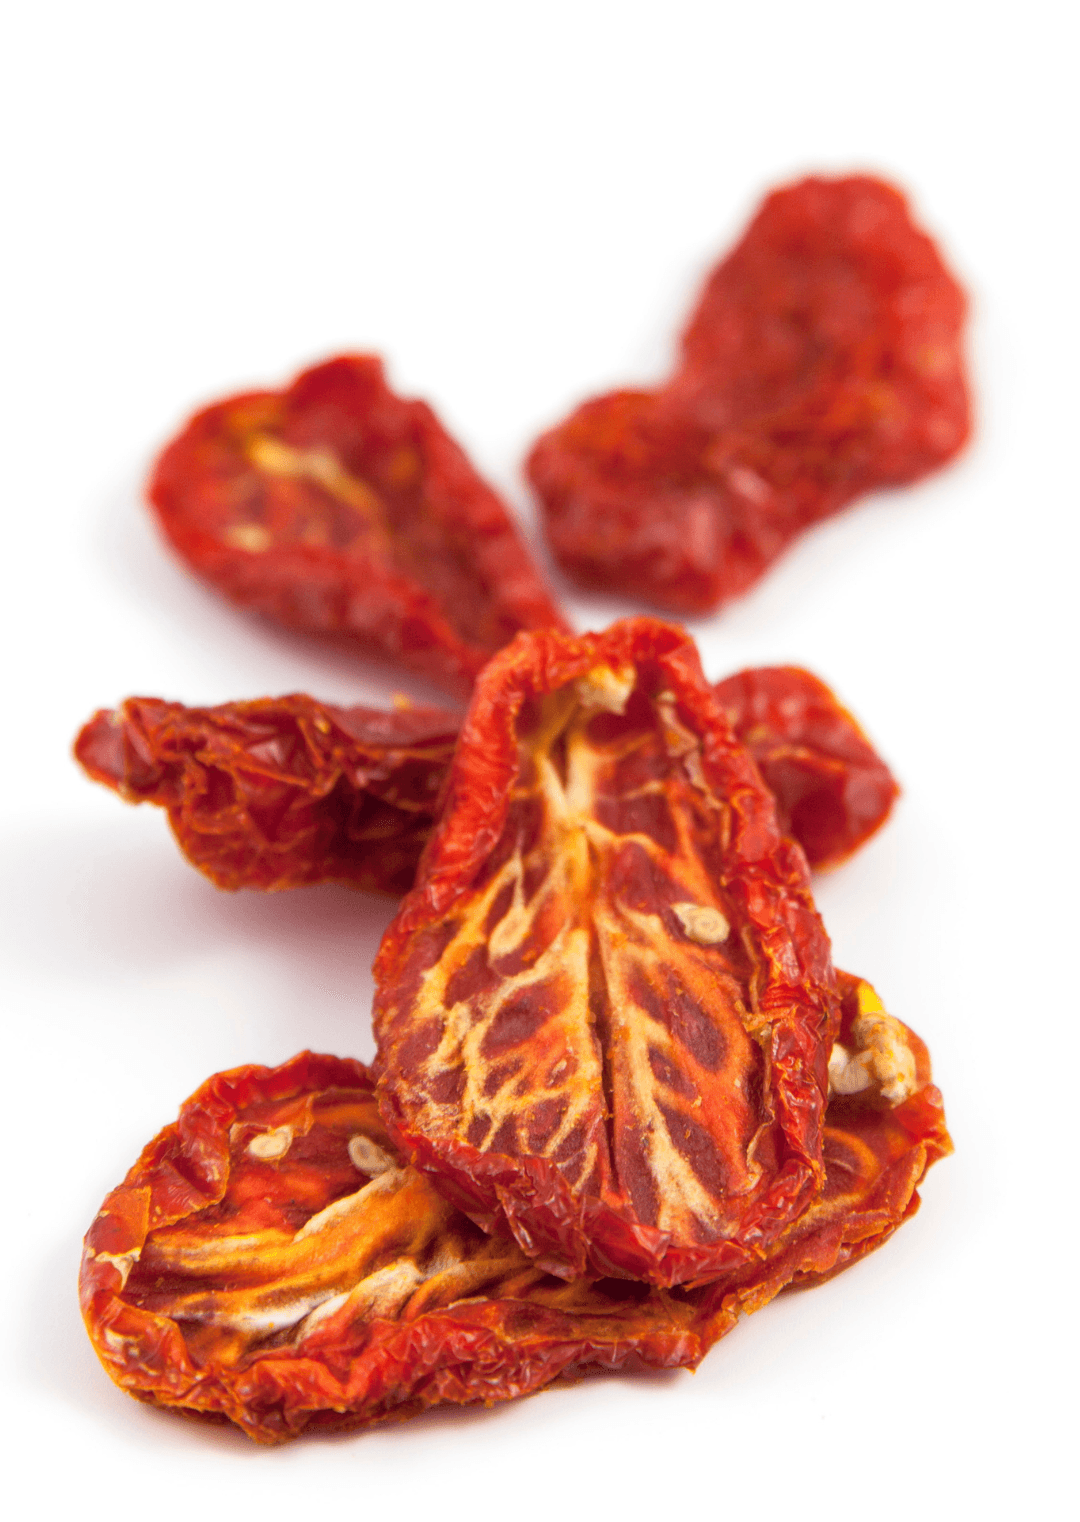 Dried Tomatoes 500g